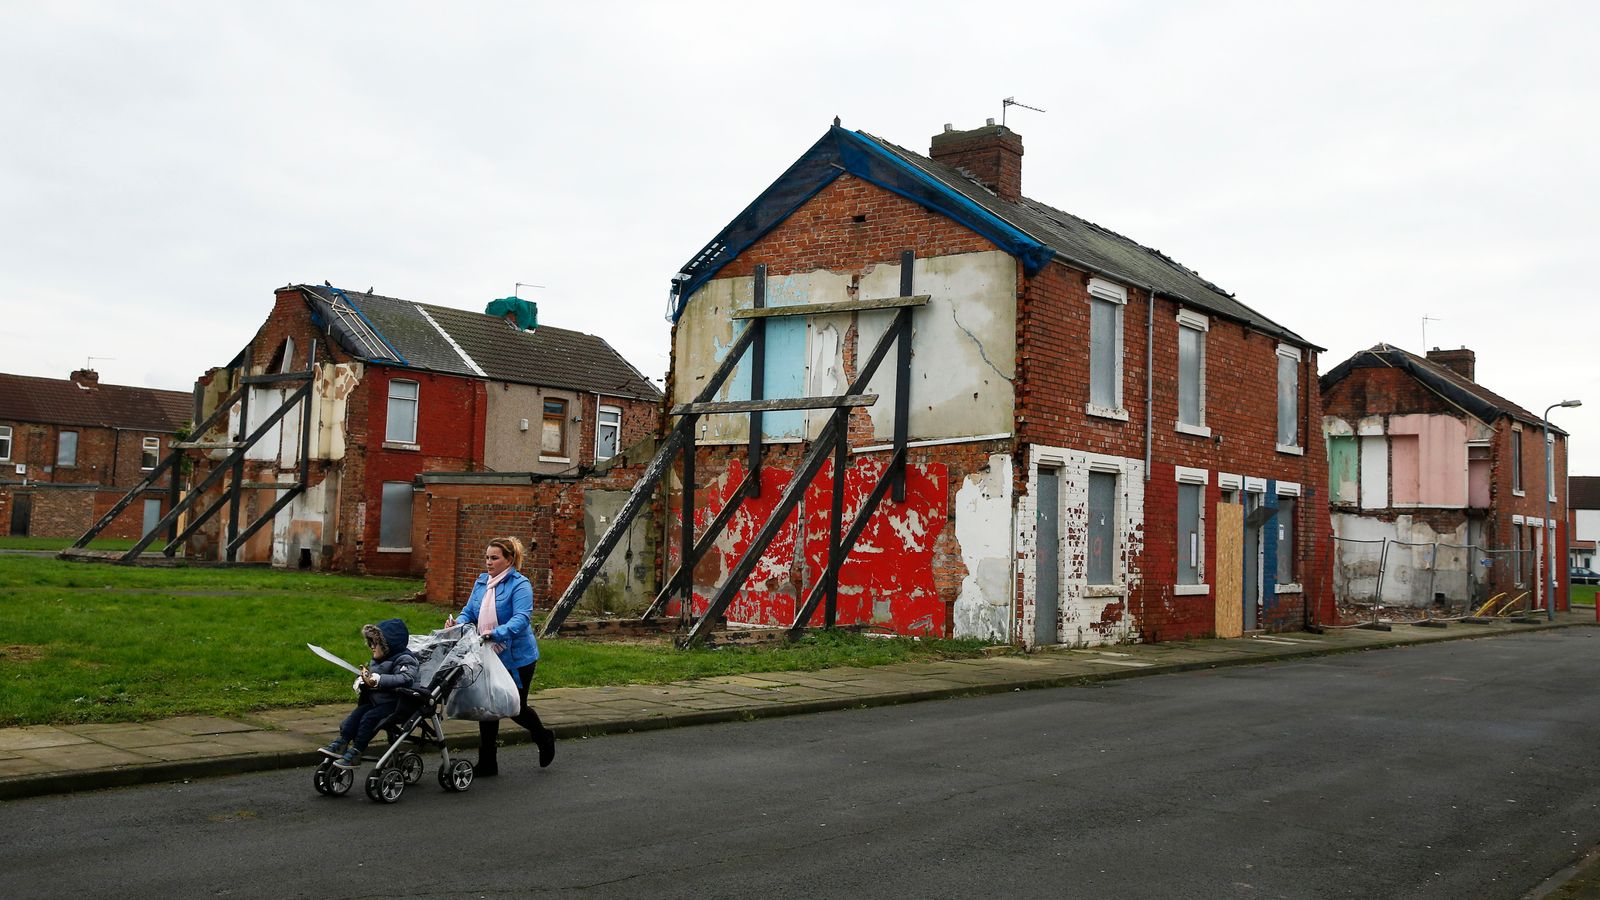 Real incomes for poorest families will not return to pre-COVID level 'until end of 2026'